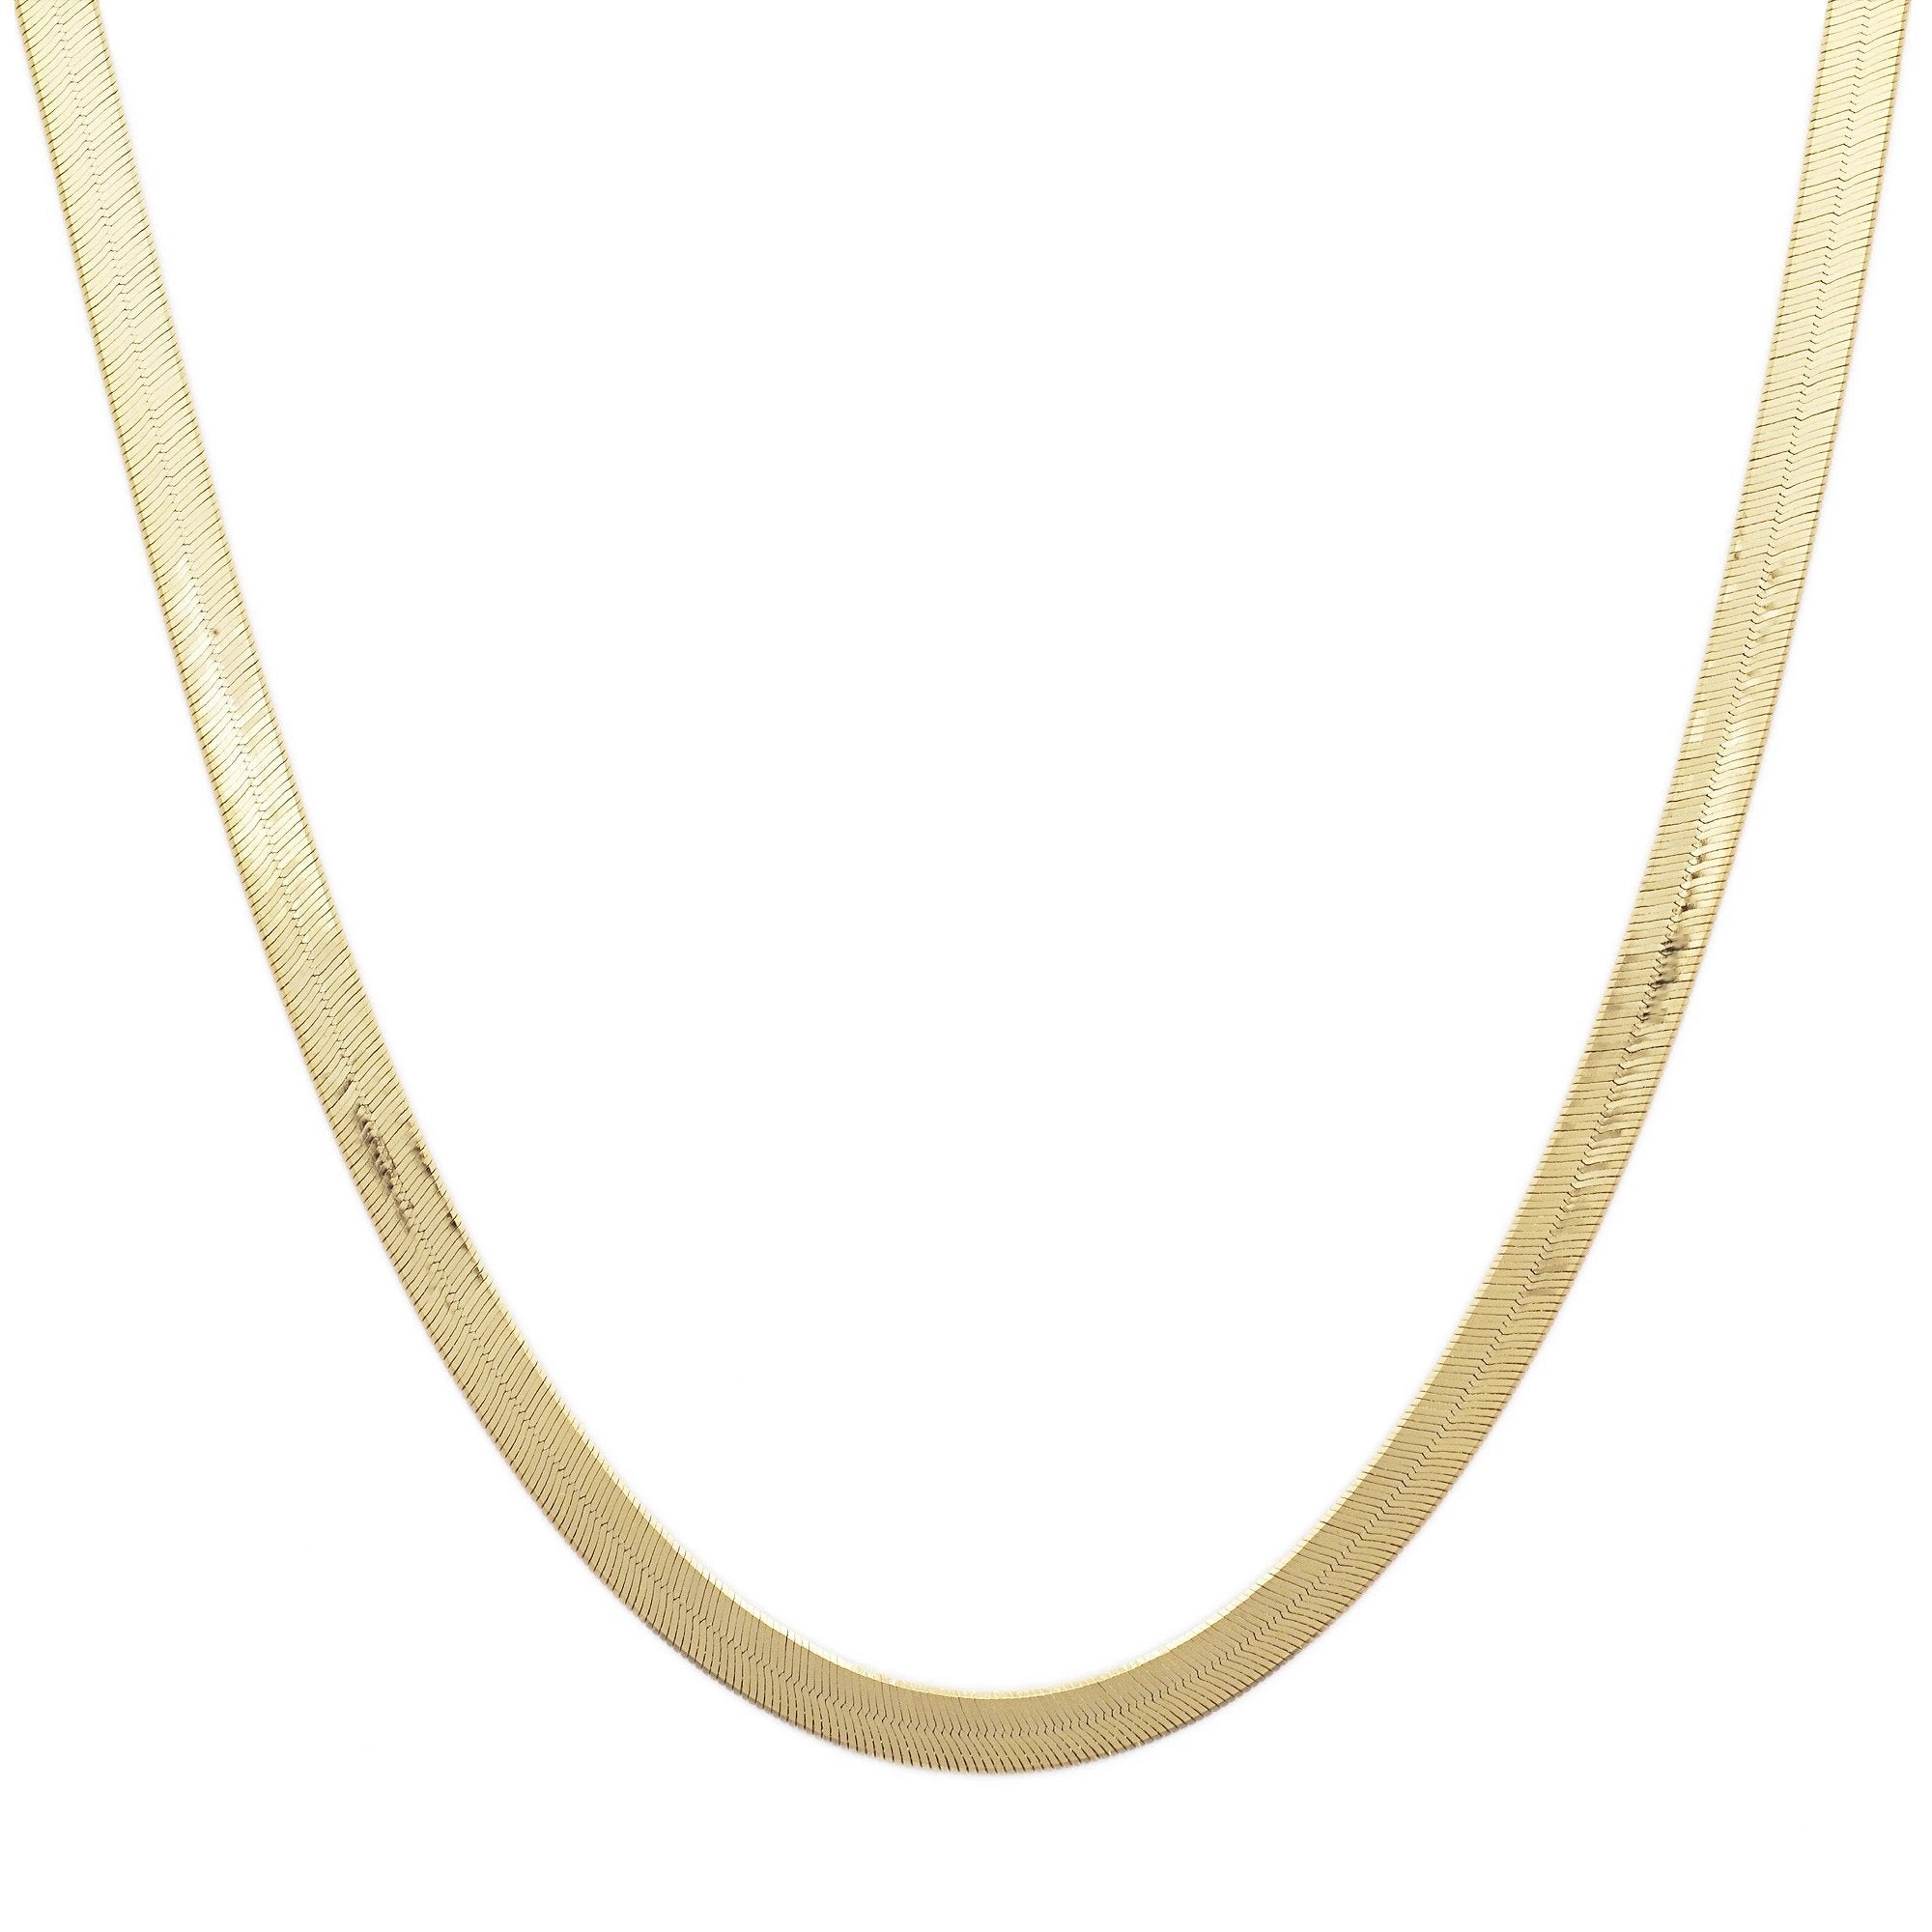 DAY 6 - Luxe Charming Herringbone Chain 16.5 - 18" Necklace Gold - SO PRETTY CARA COTTER